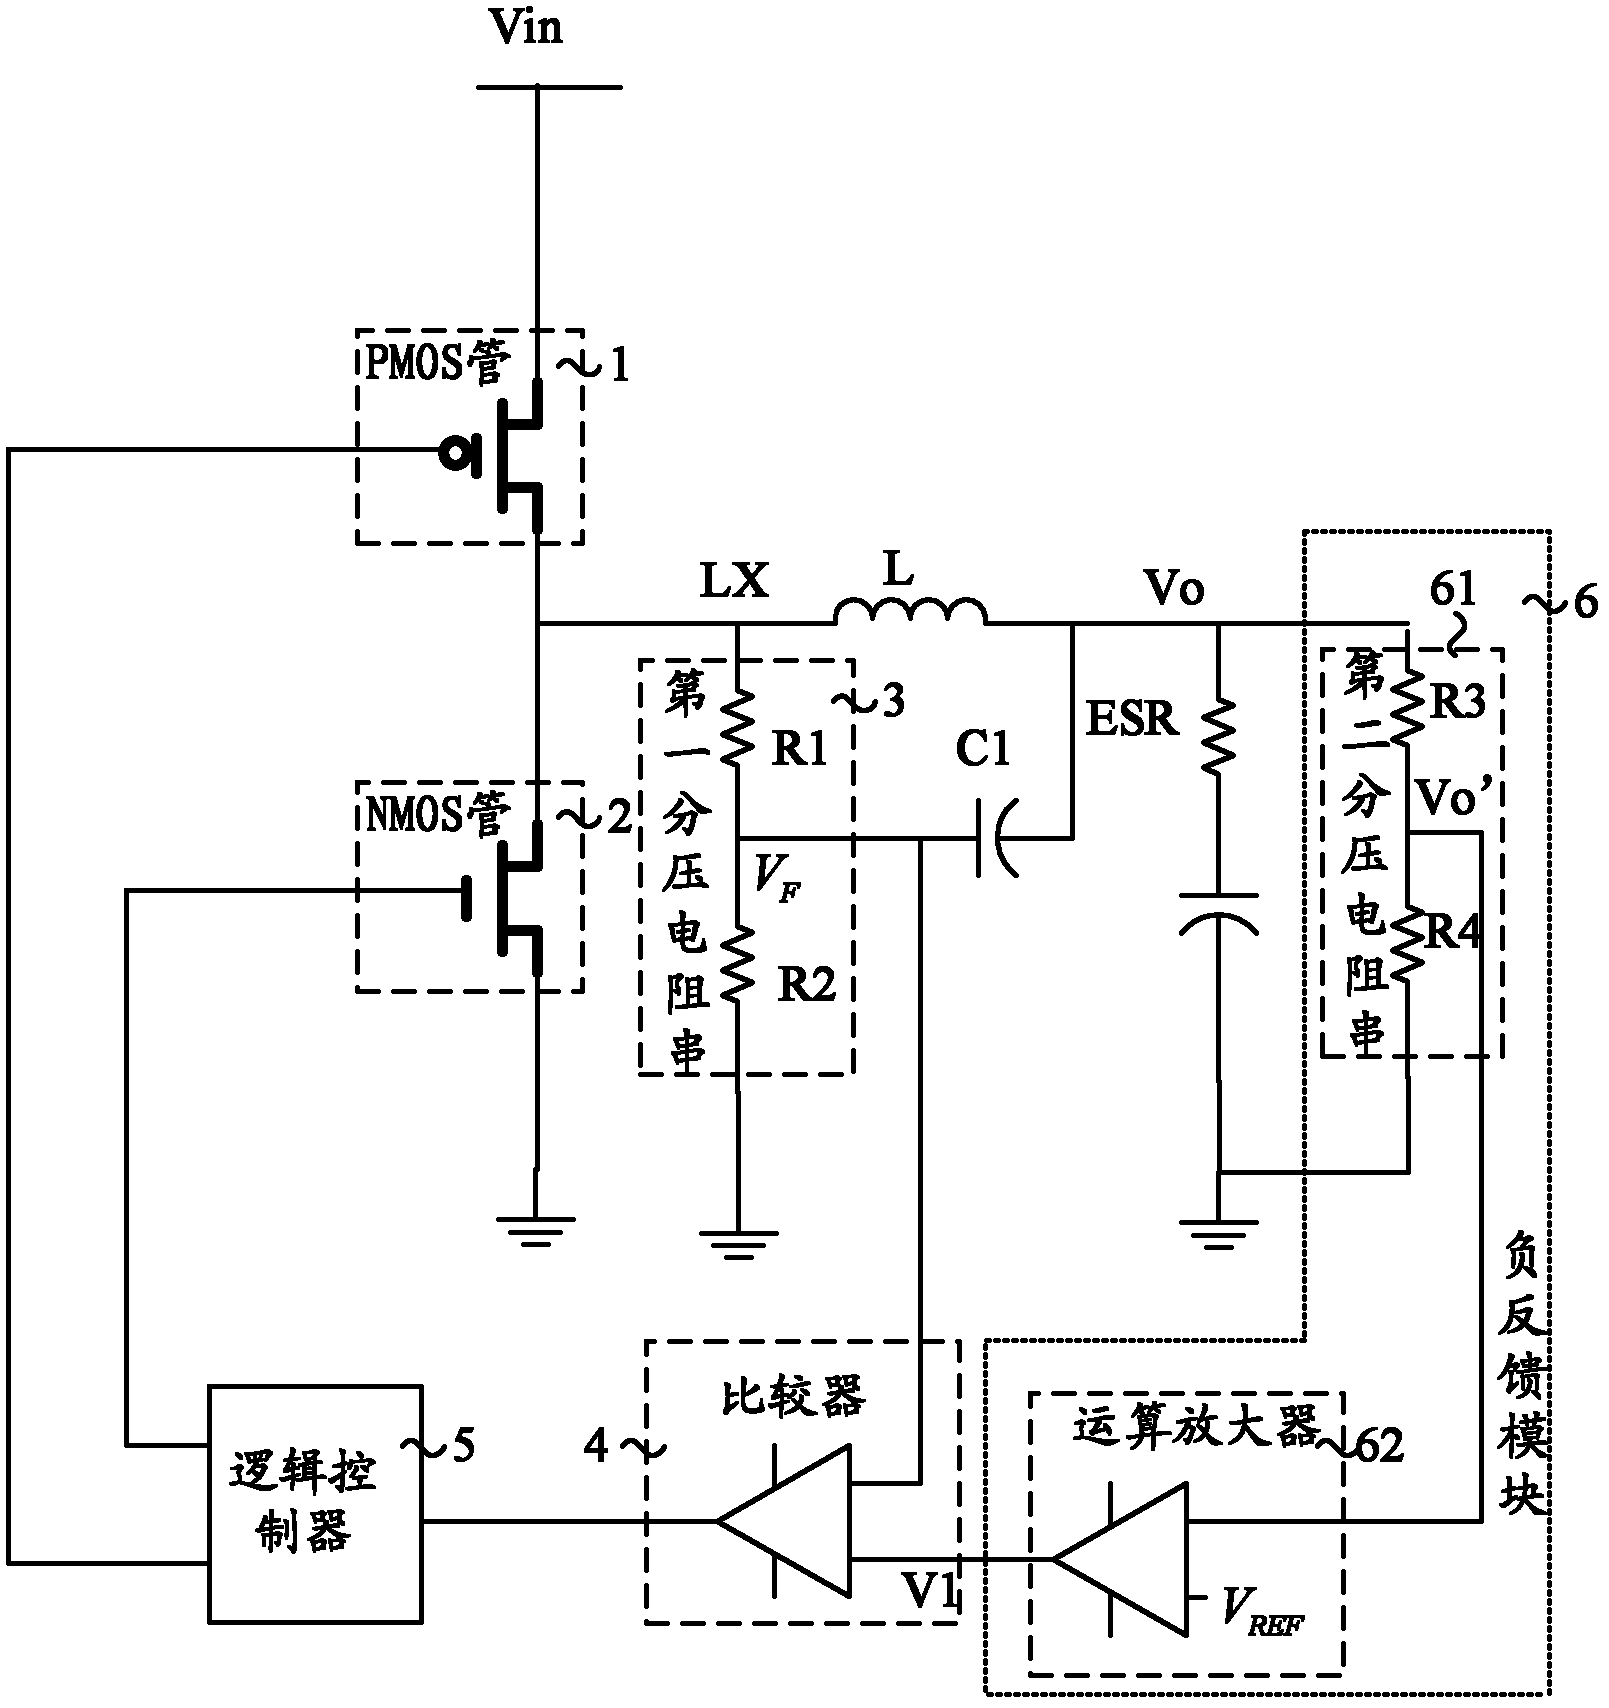 Delayed control transfer circuit and power supply system